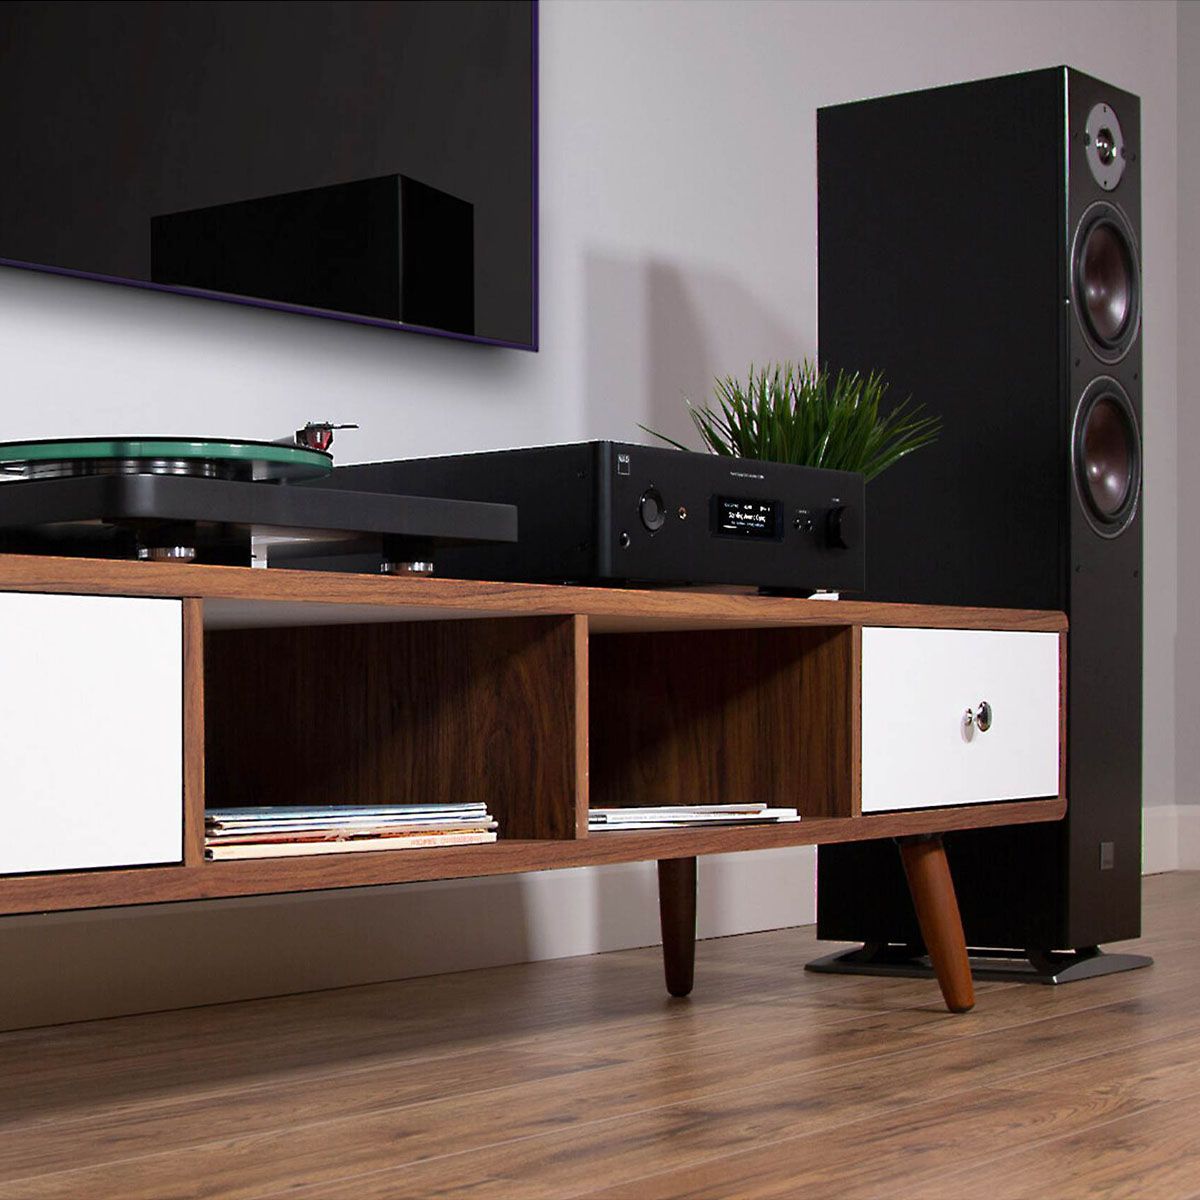 NAD C399 in black view of front angle living room cinematic